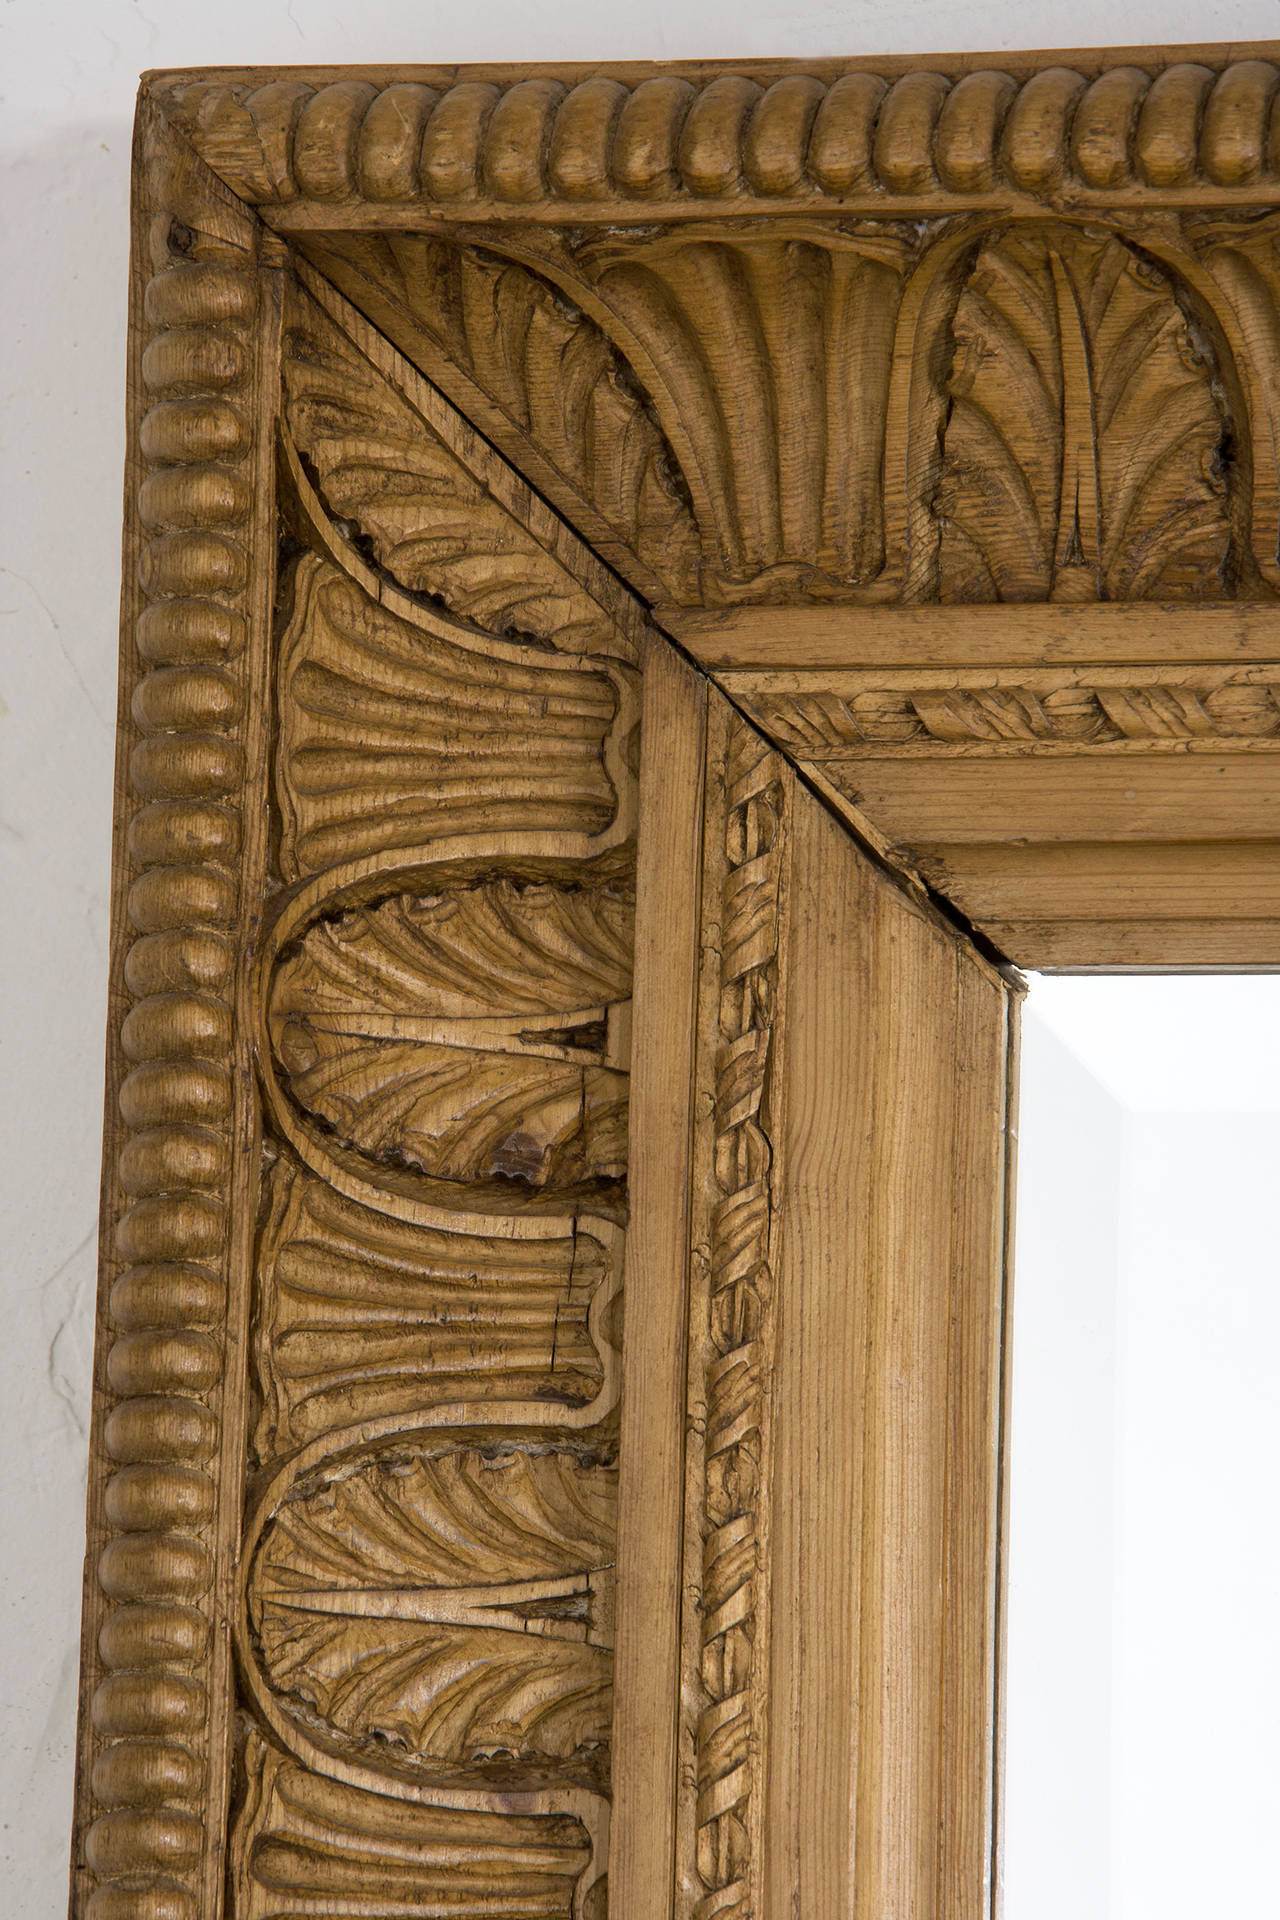 Irish carved pine mirror with bevel. 
Sold as is. Natural wood finish.
Detail carving as shown one of a kind.